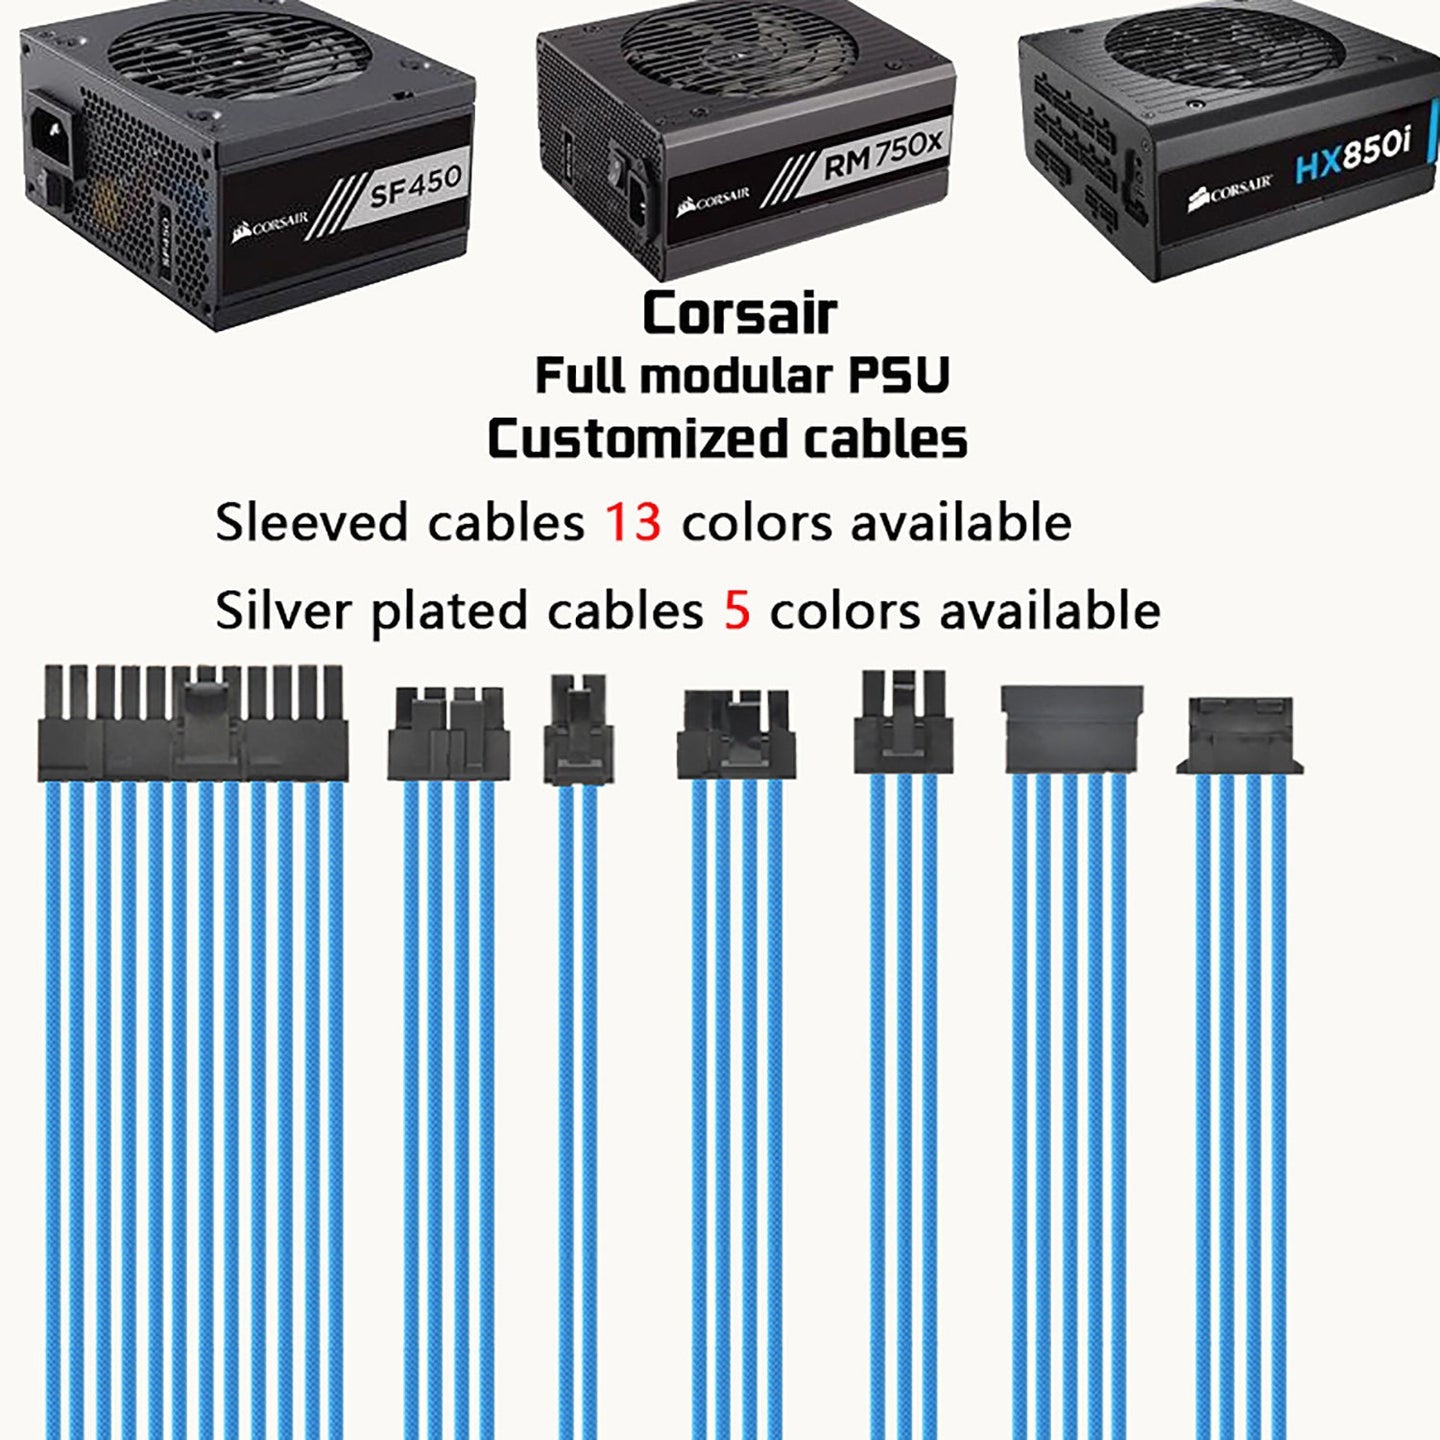 customized-corsair-full-modular-psu-cables-sleeved-silver-plated-cables-mod